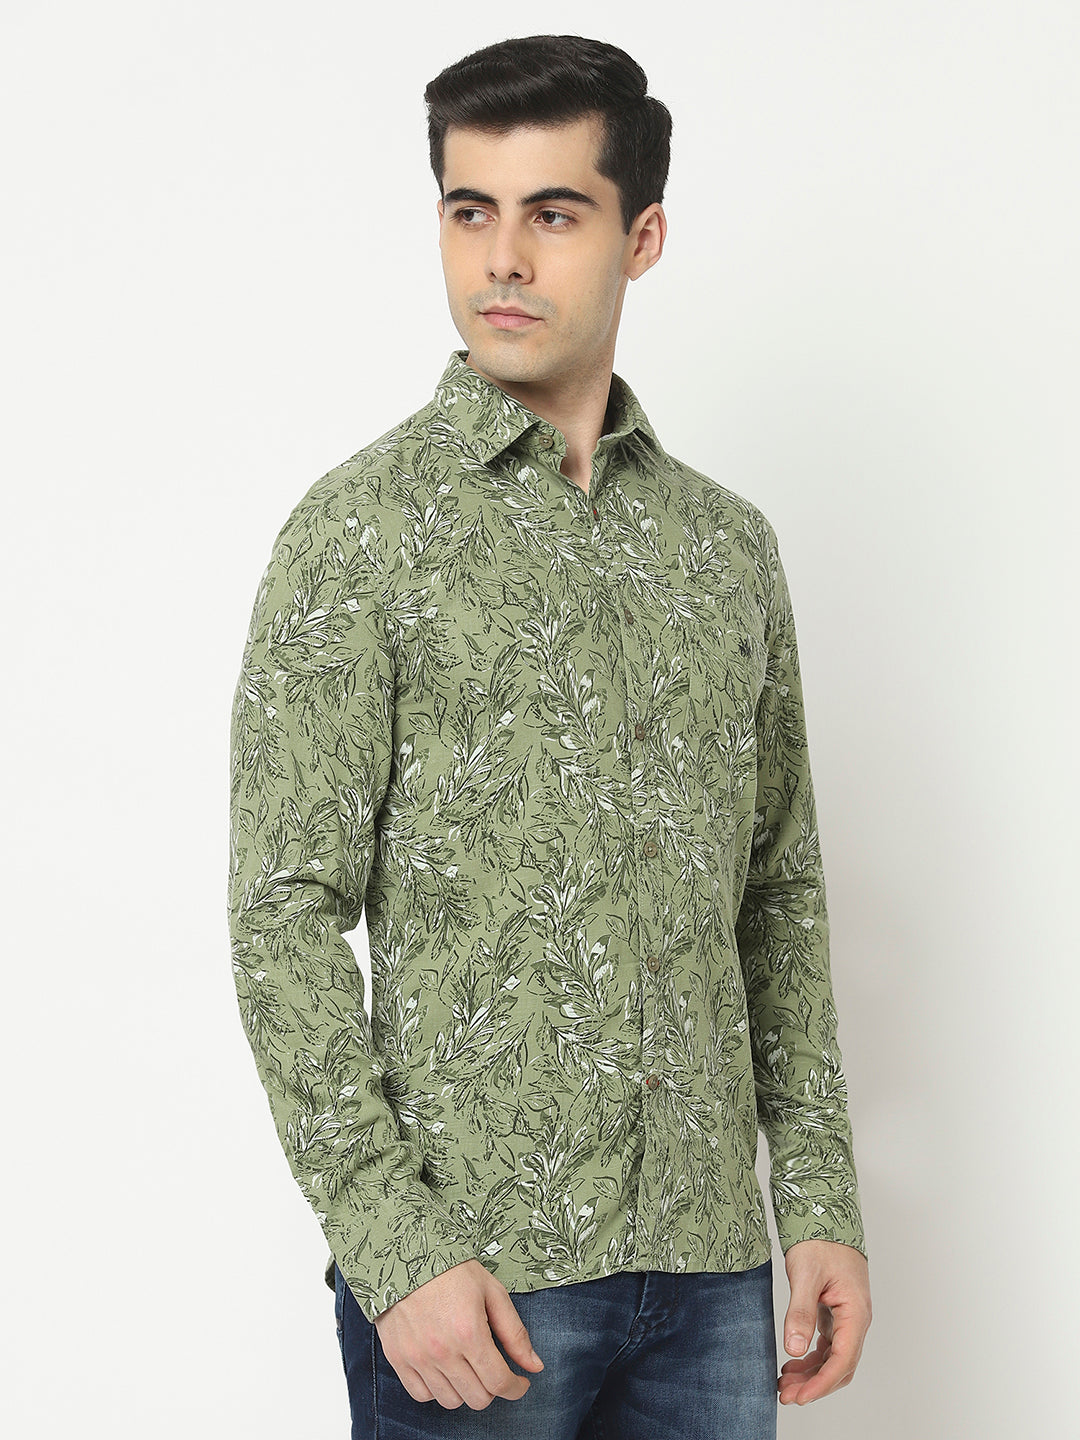  Green Shirt in Floral Print